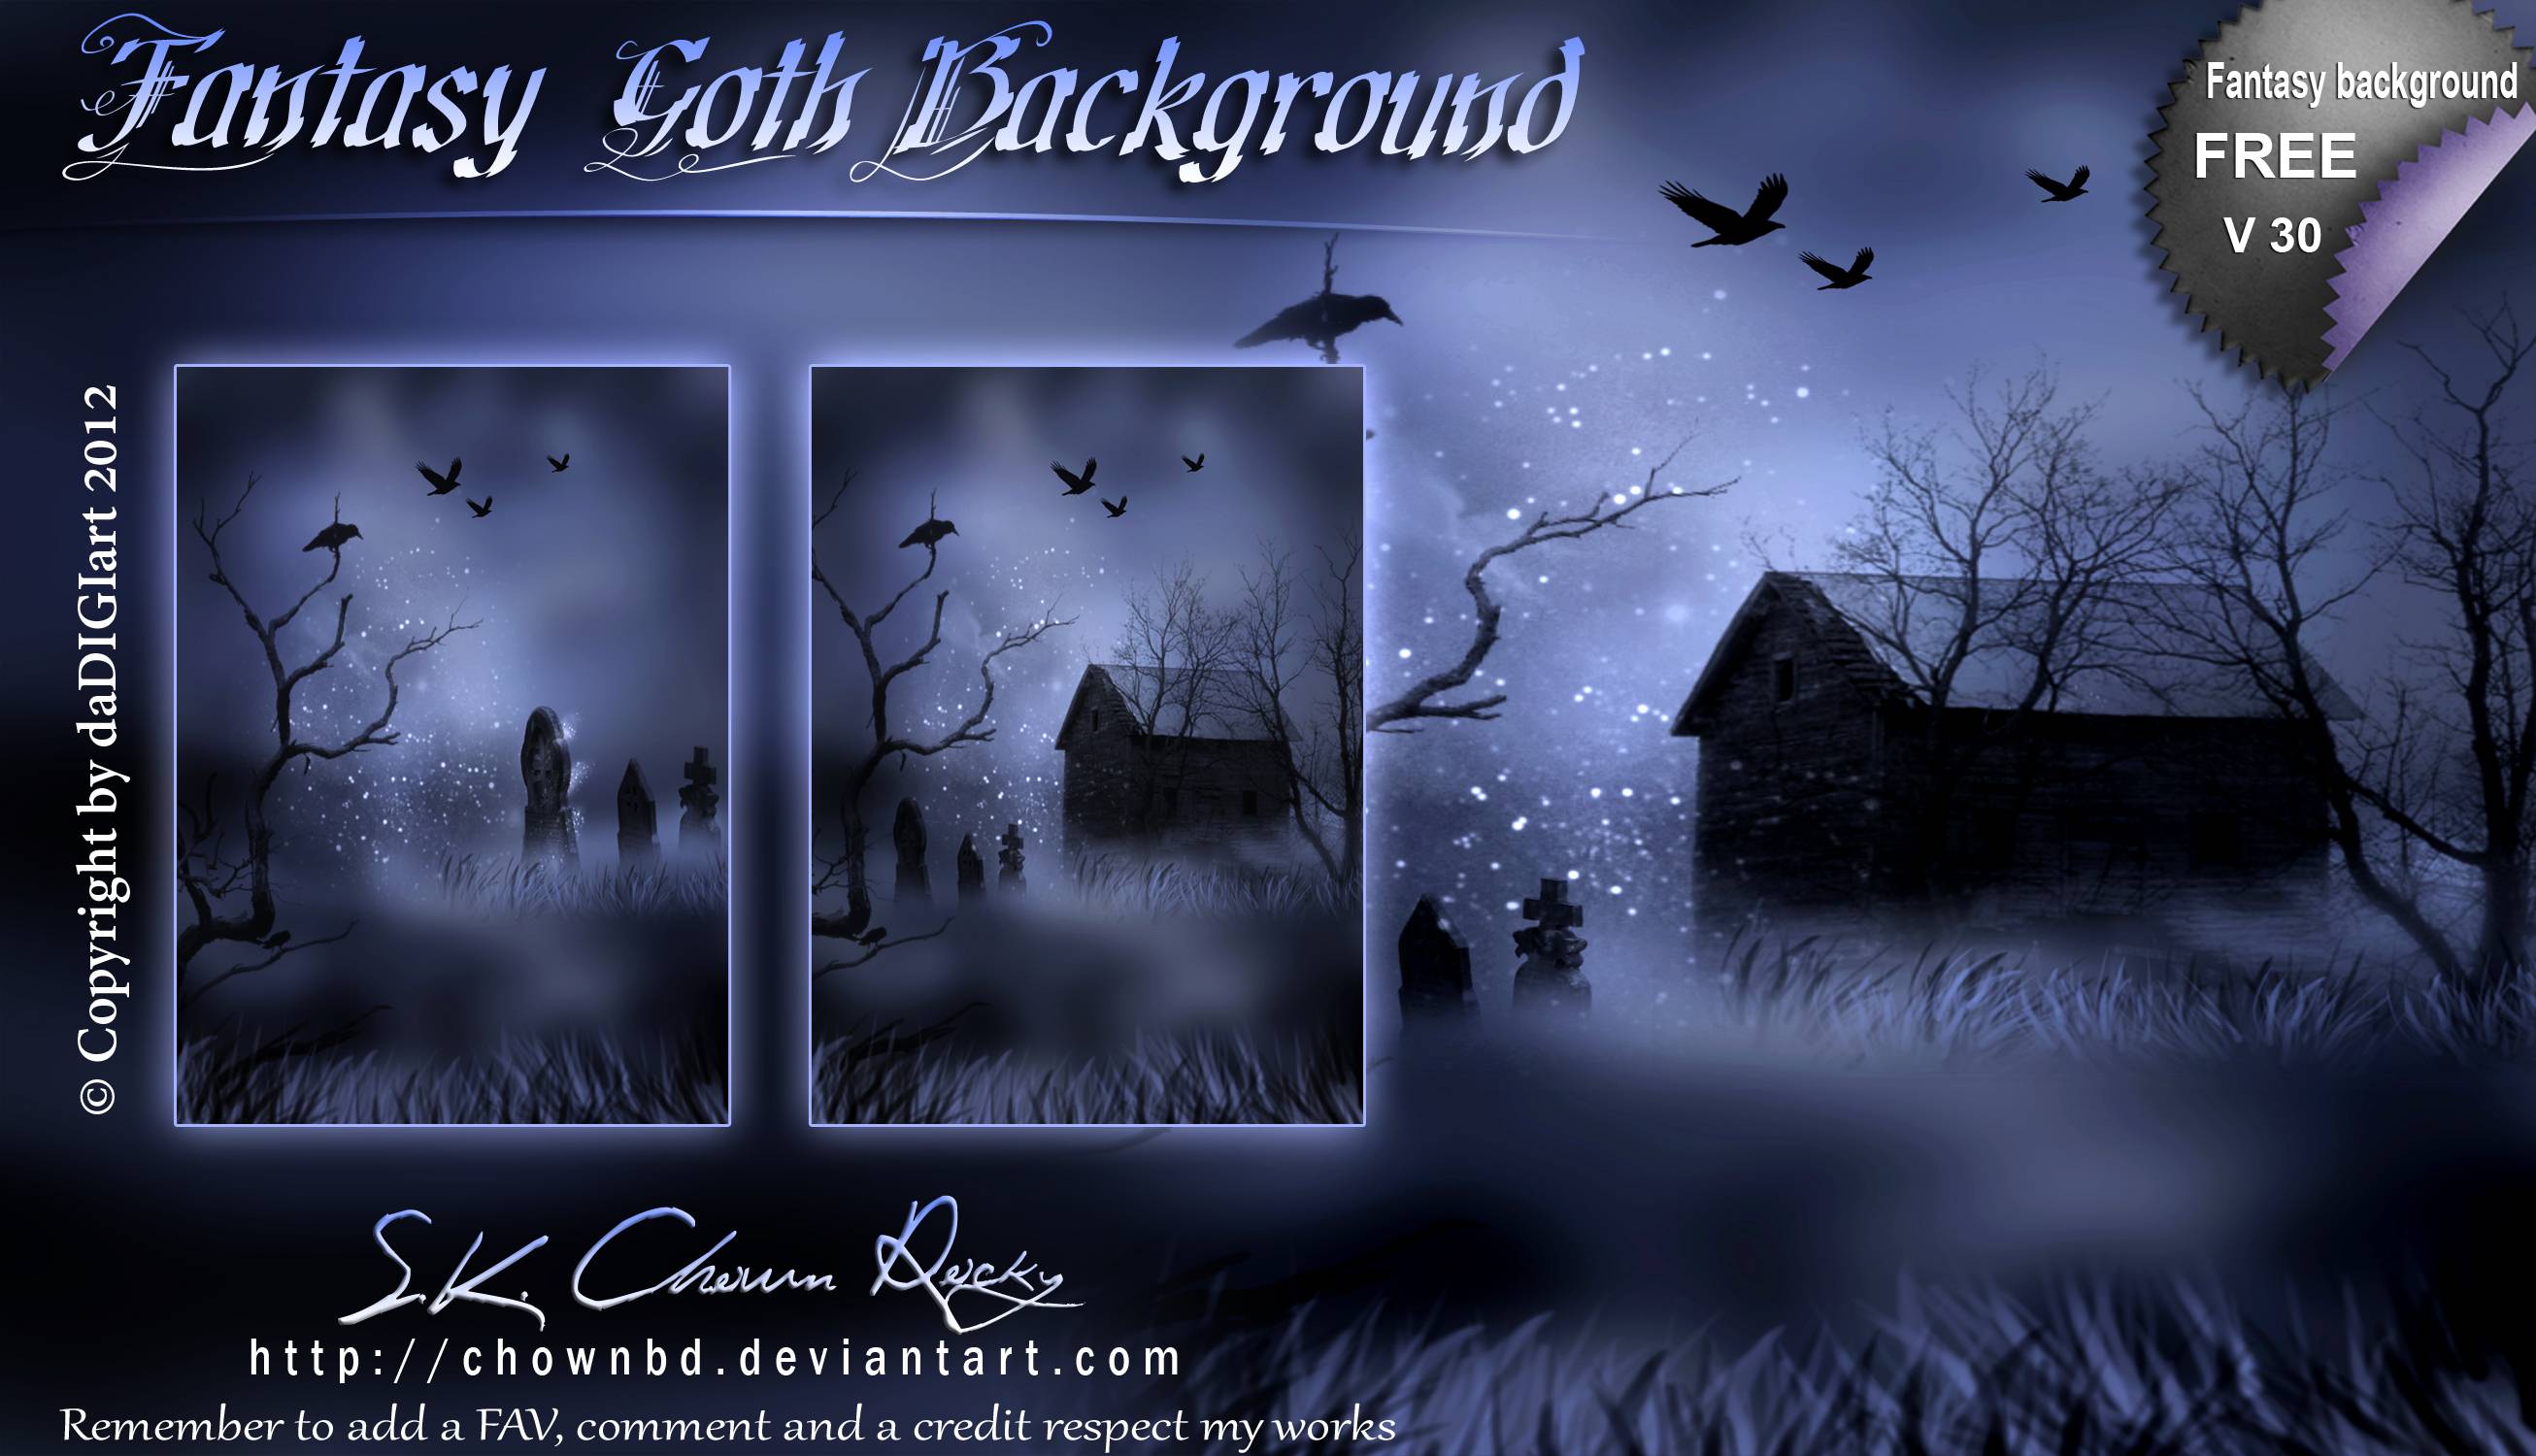 More Like Fantasy Goth Background By SK DIGIART